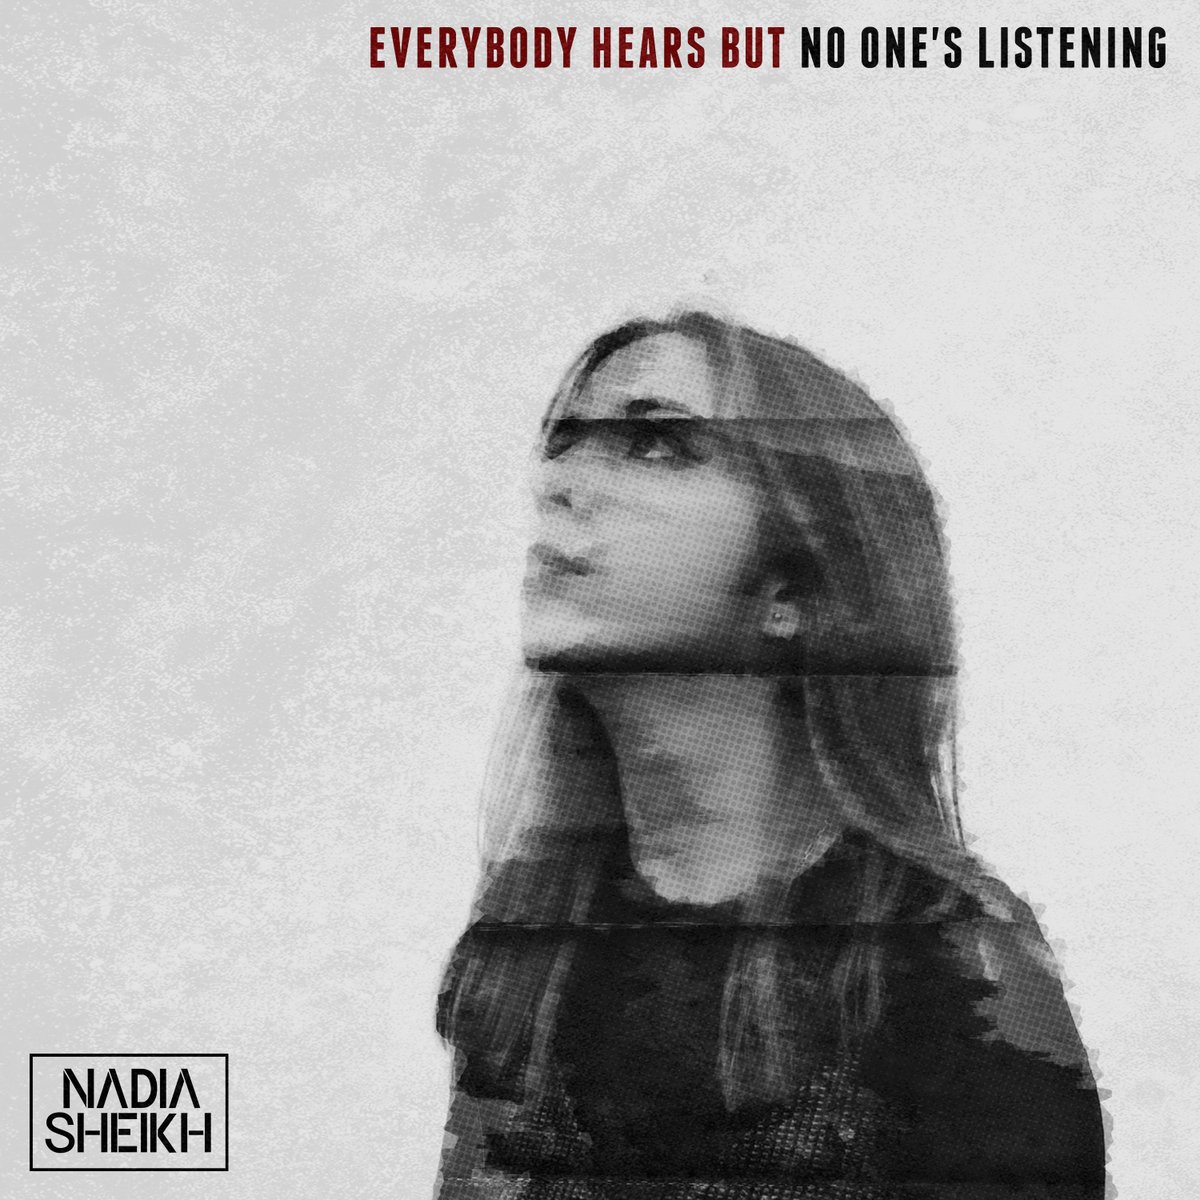 The new EP ‘Everybody Hears but No One’s Listening’ will be dropping on Friday 28th February! PRE-SAVE AVAILABLE NOWWWWW! 💃🏽💃🏽💃🏽⁣ ffm.to/nadiasheikhehb…